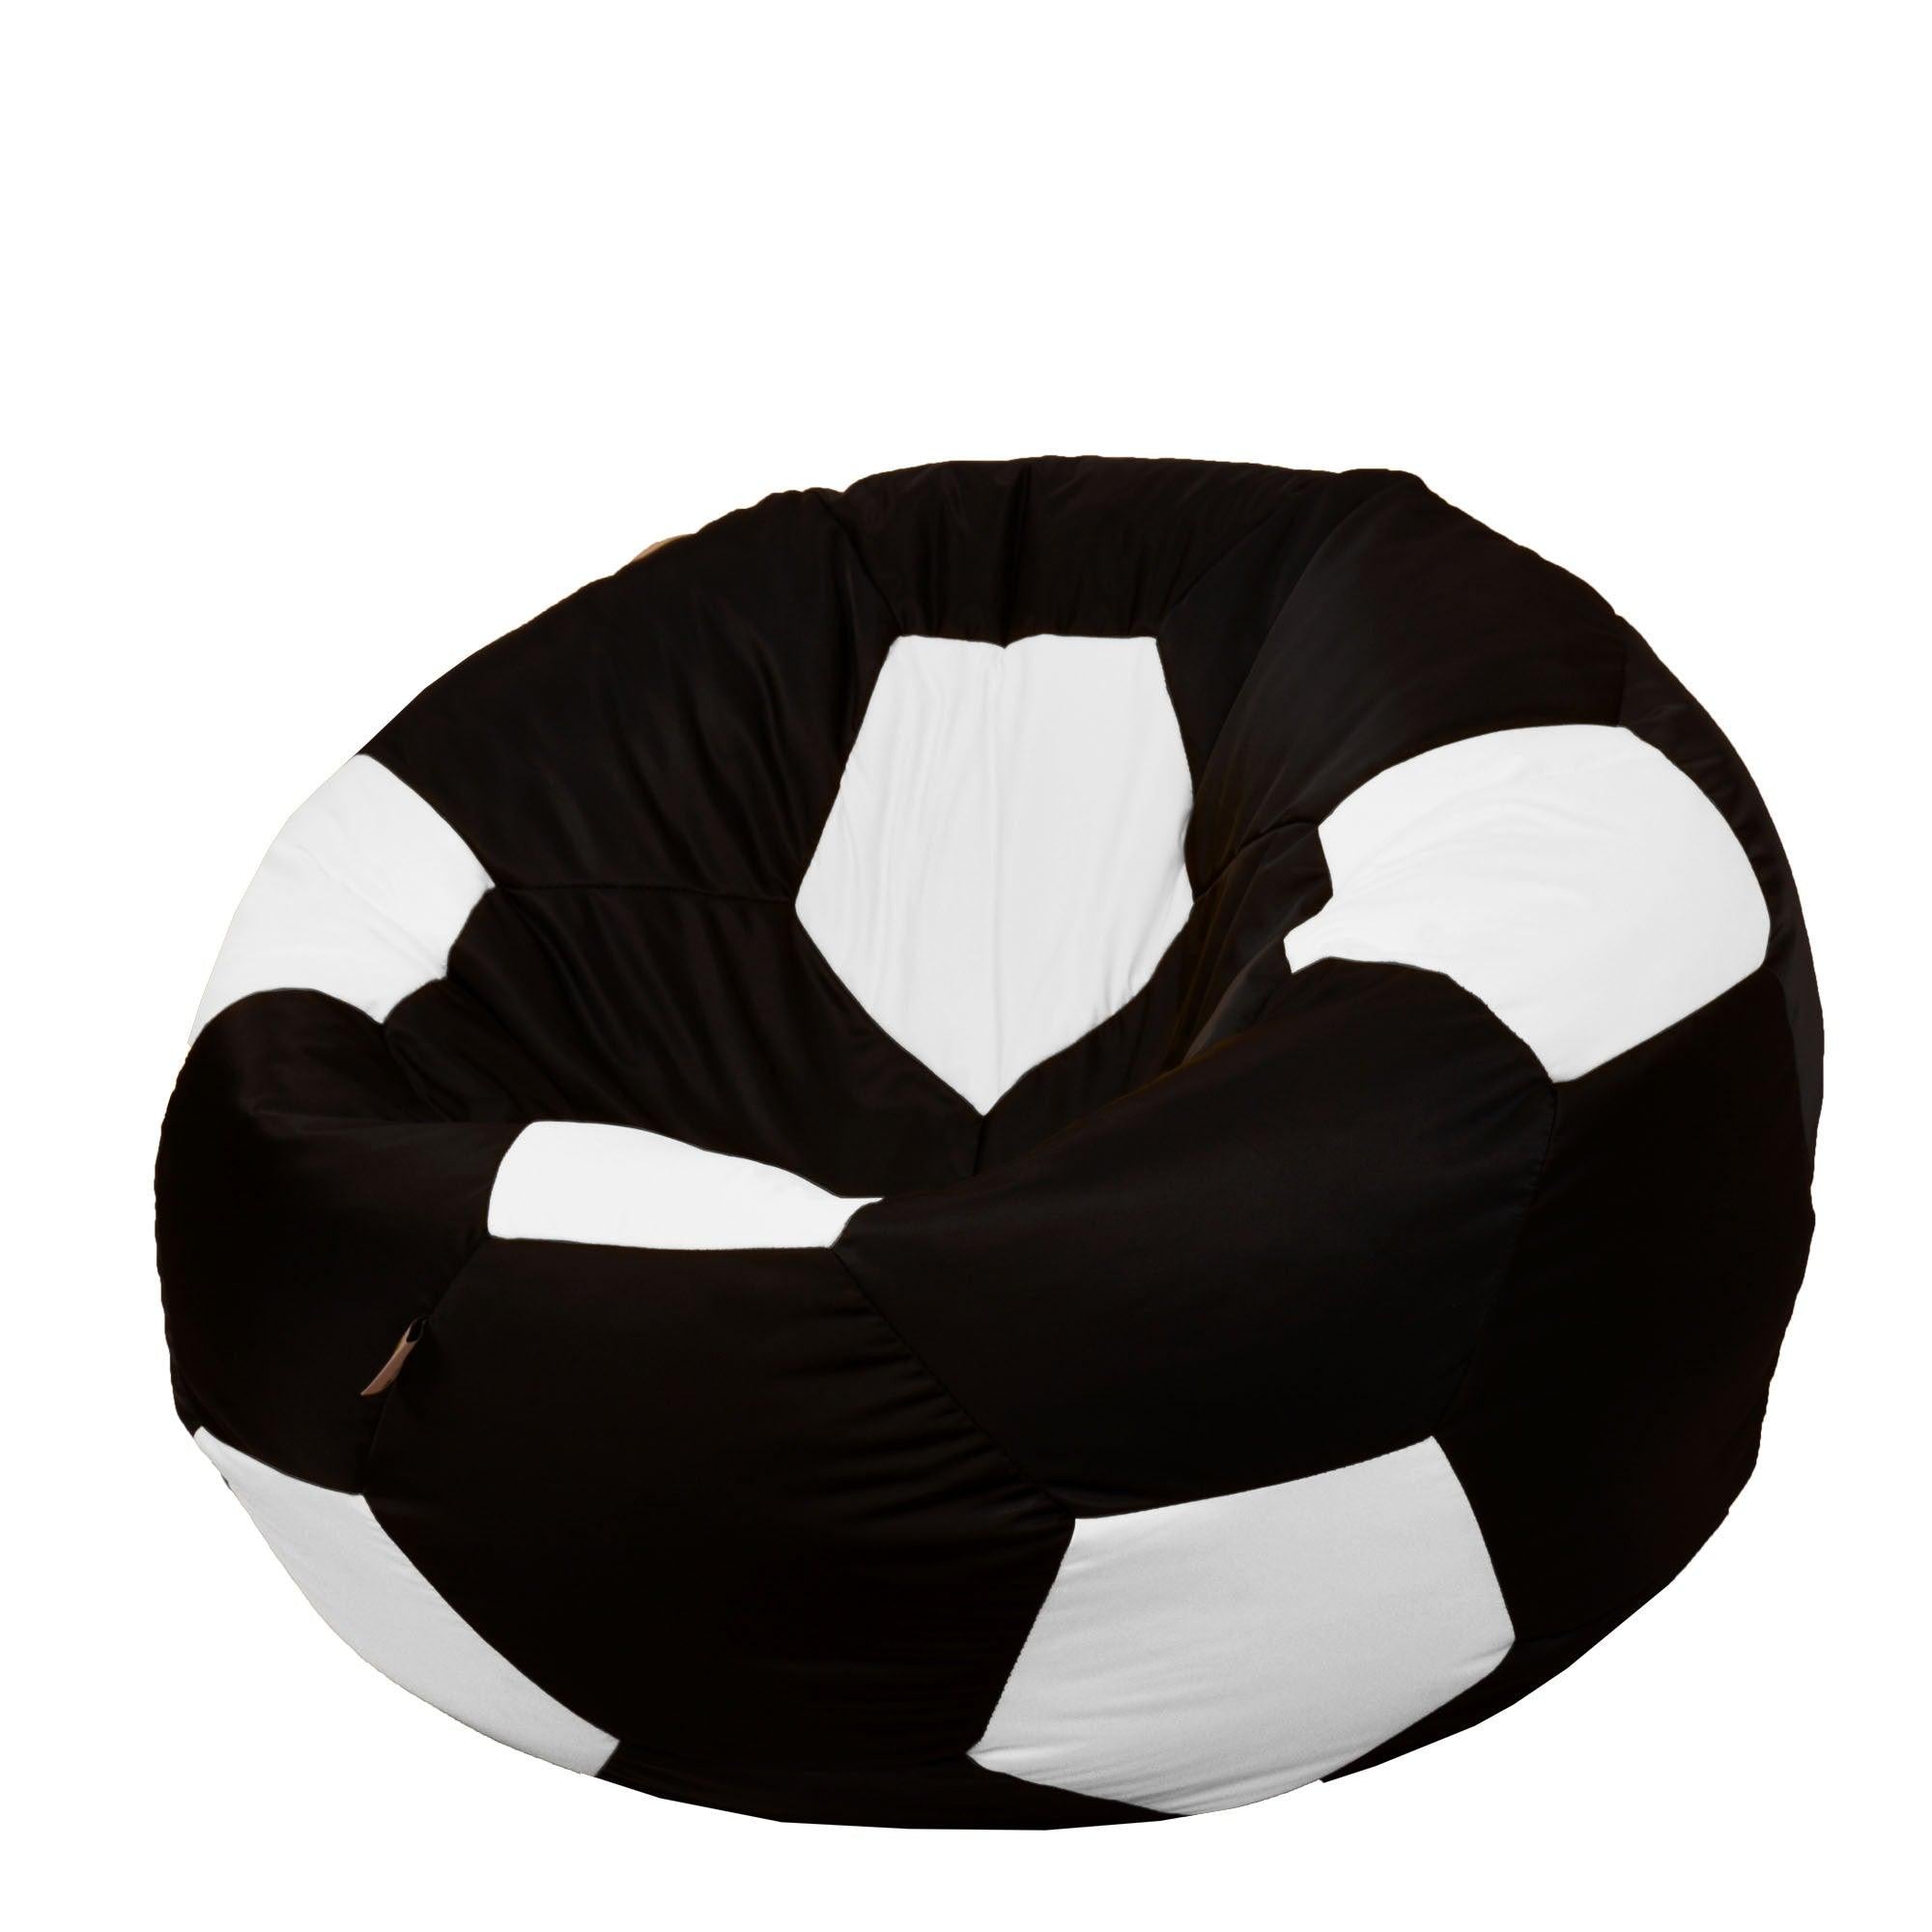 Relaxsit Football Bean Bag – Luxury Room Comfy Furniture – Bean Bag Chair with Cool Imprinting Relaxsit